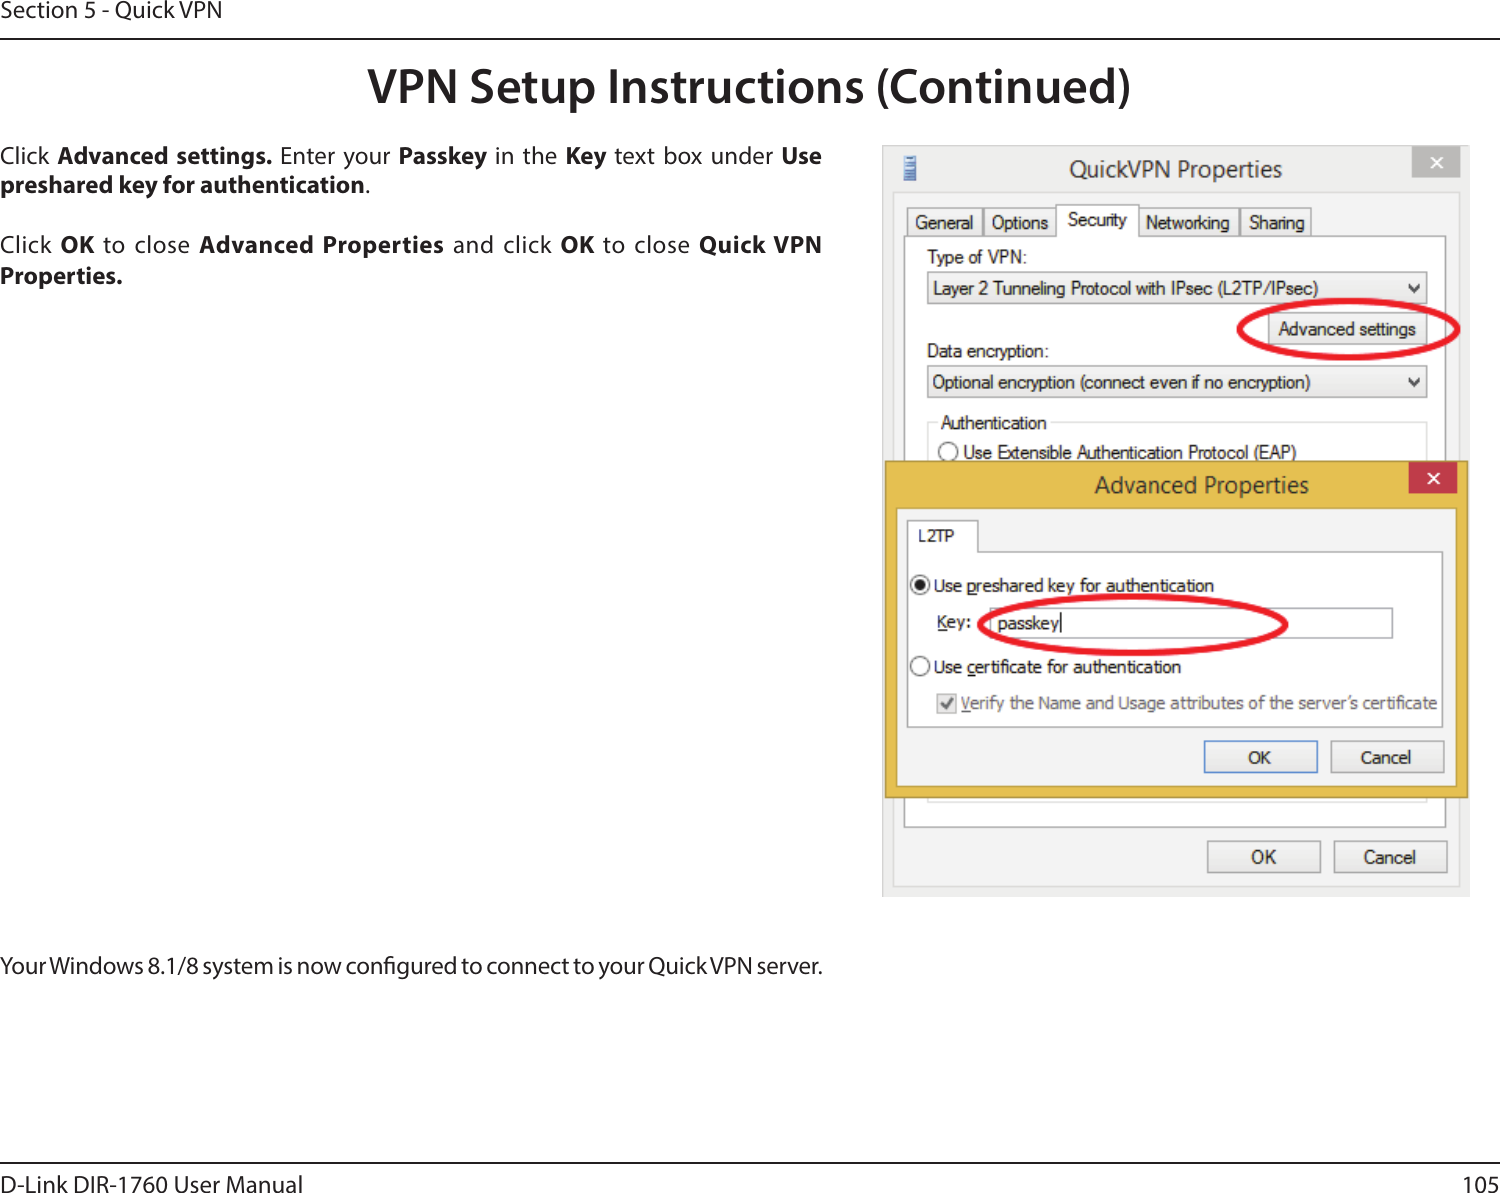 105D-Link DIR-1760 User ManualSection 5 - Quick VPNClick Advanced settings. Enter your Passkey in the Key text box under Use preshared key for authentication. Click OK to close Advanced Properties and click OK to close Quick VPN Properties.Your Windows 8.1/8 system is now congured to connect to your Quick VPN server.VPN Setup Instructions (Continued)